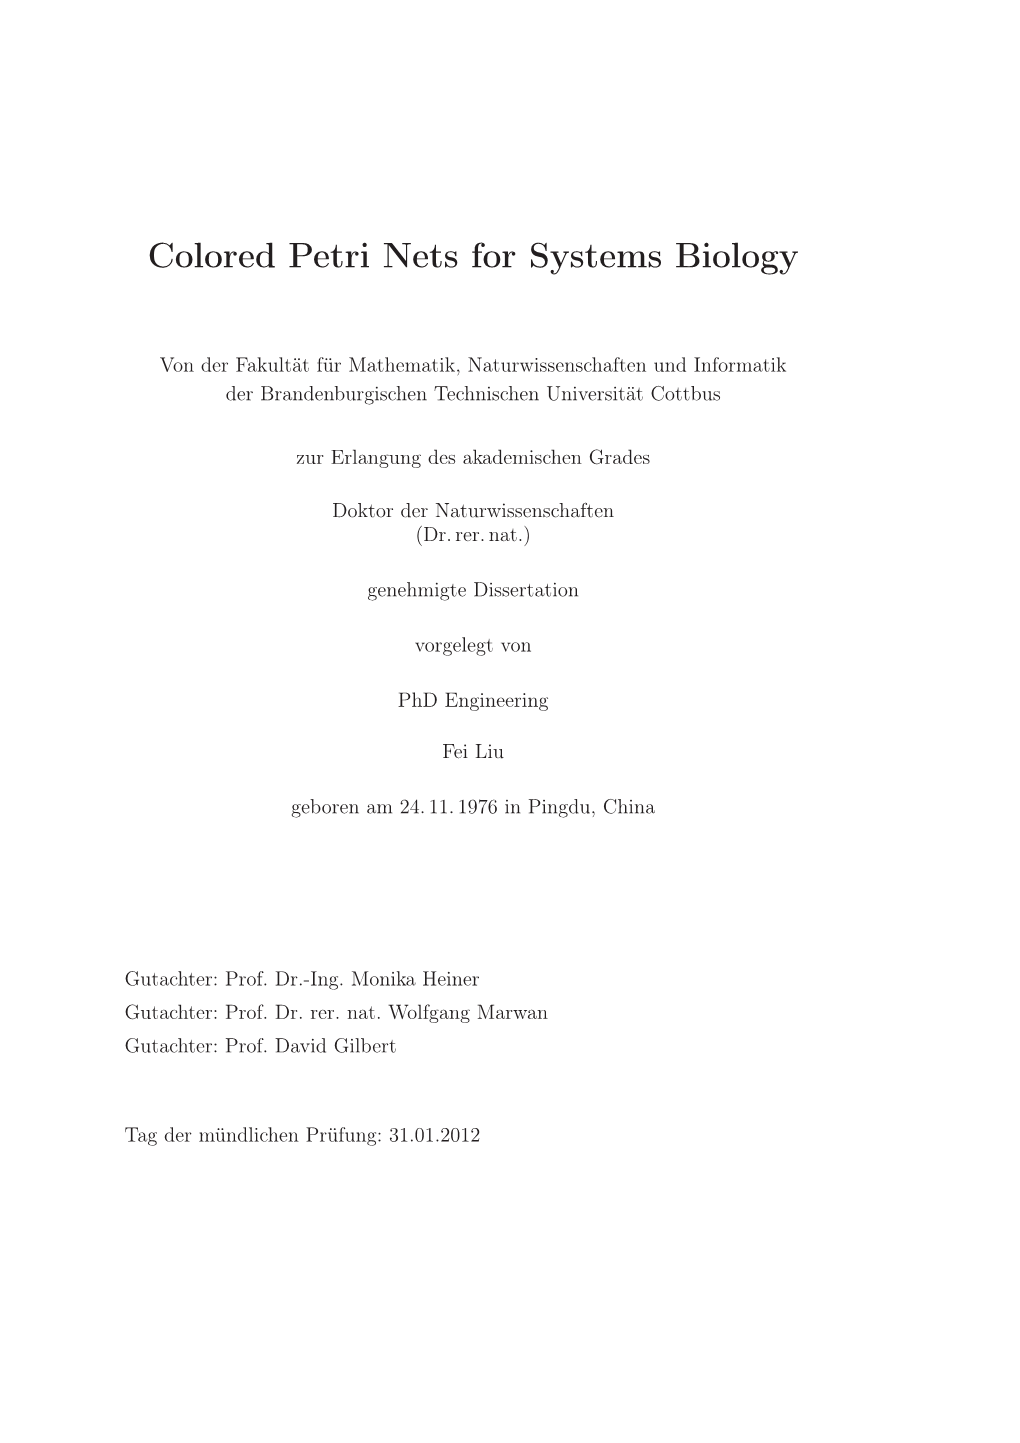 Colored Petri Nets for Systems Biology